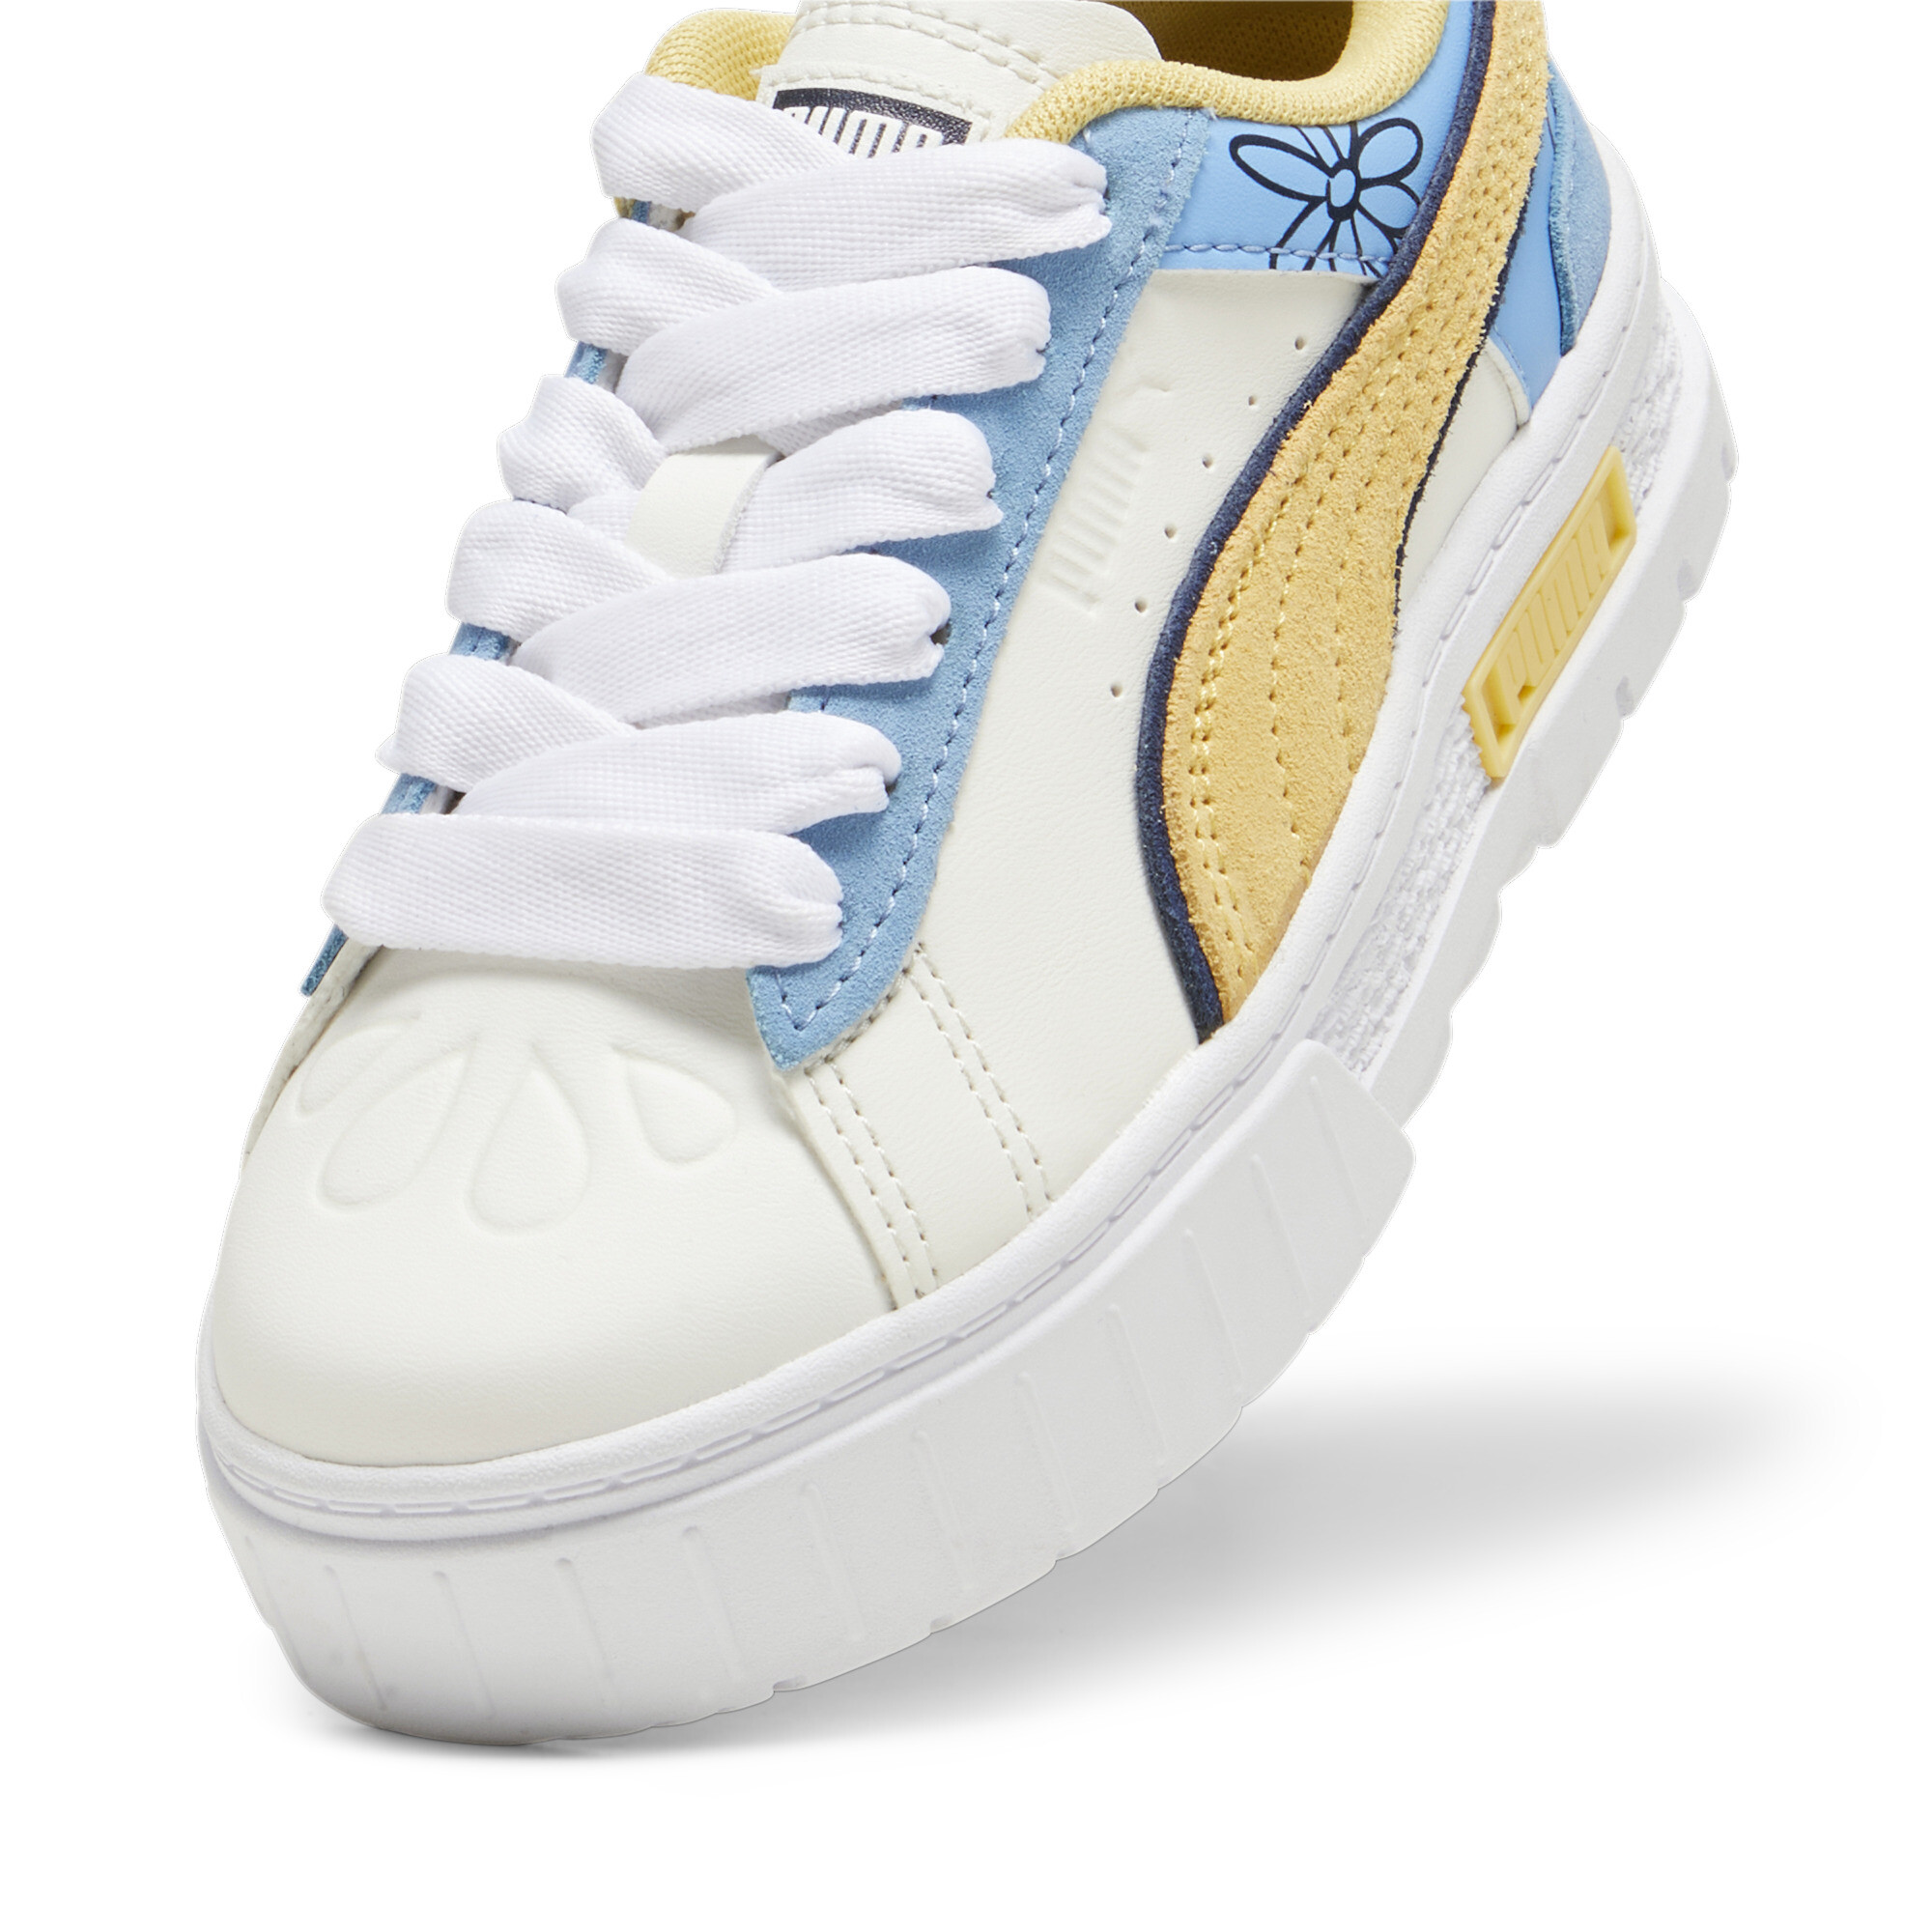 Puma X THE SMURFS Mayze Kids' Sneakers, White, Size 35, Shoes